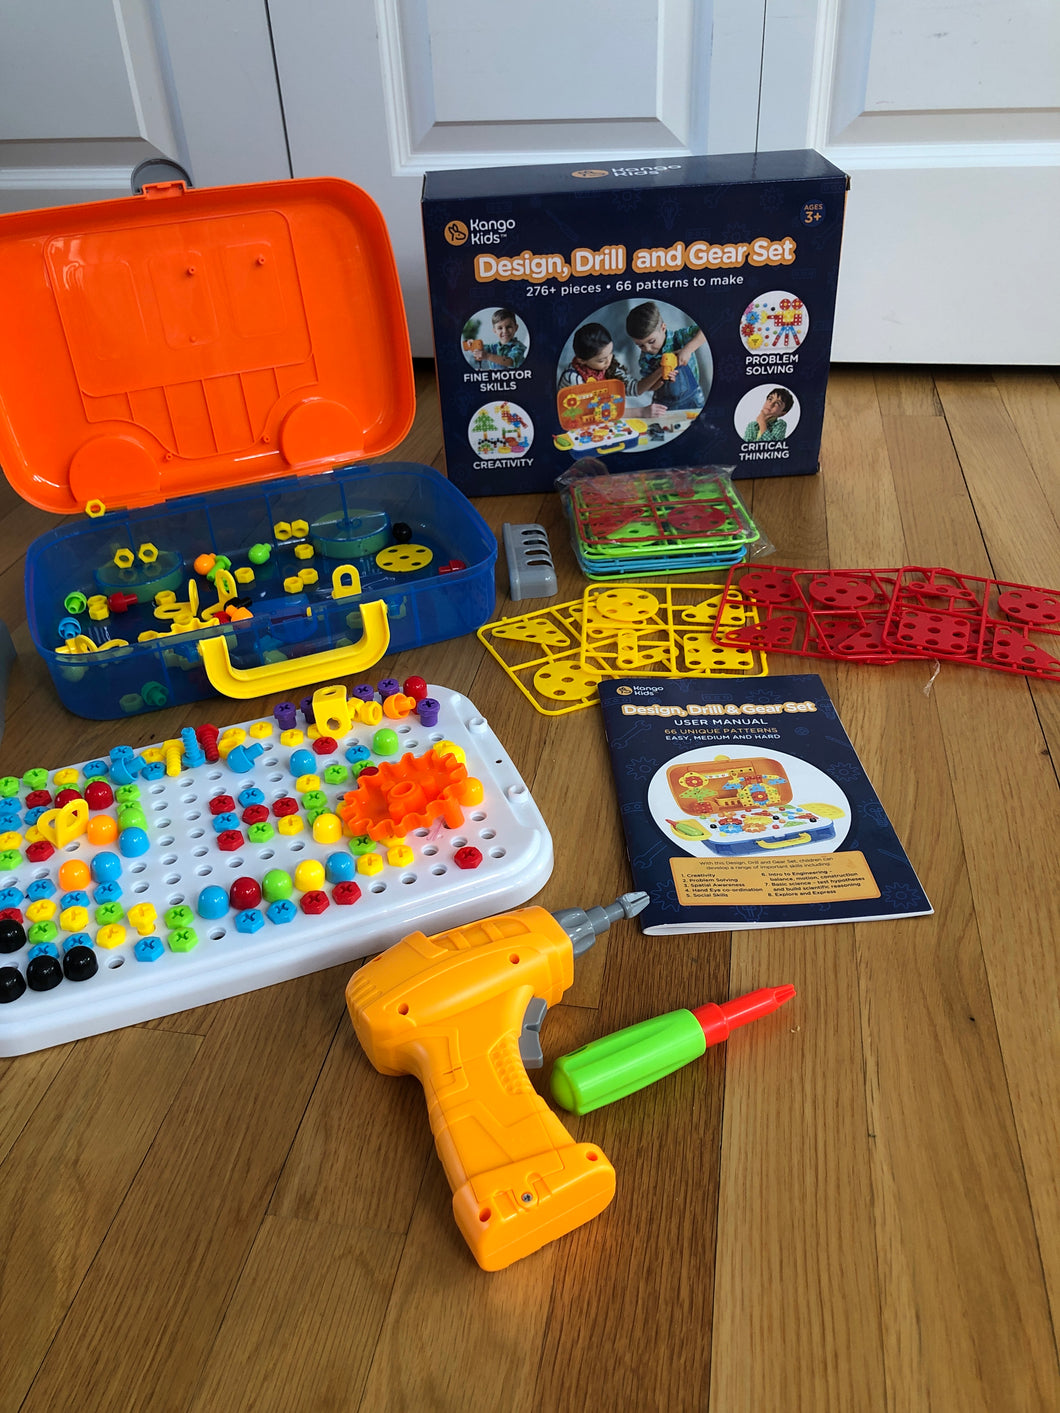 Drill and gear set by Kango Kids